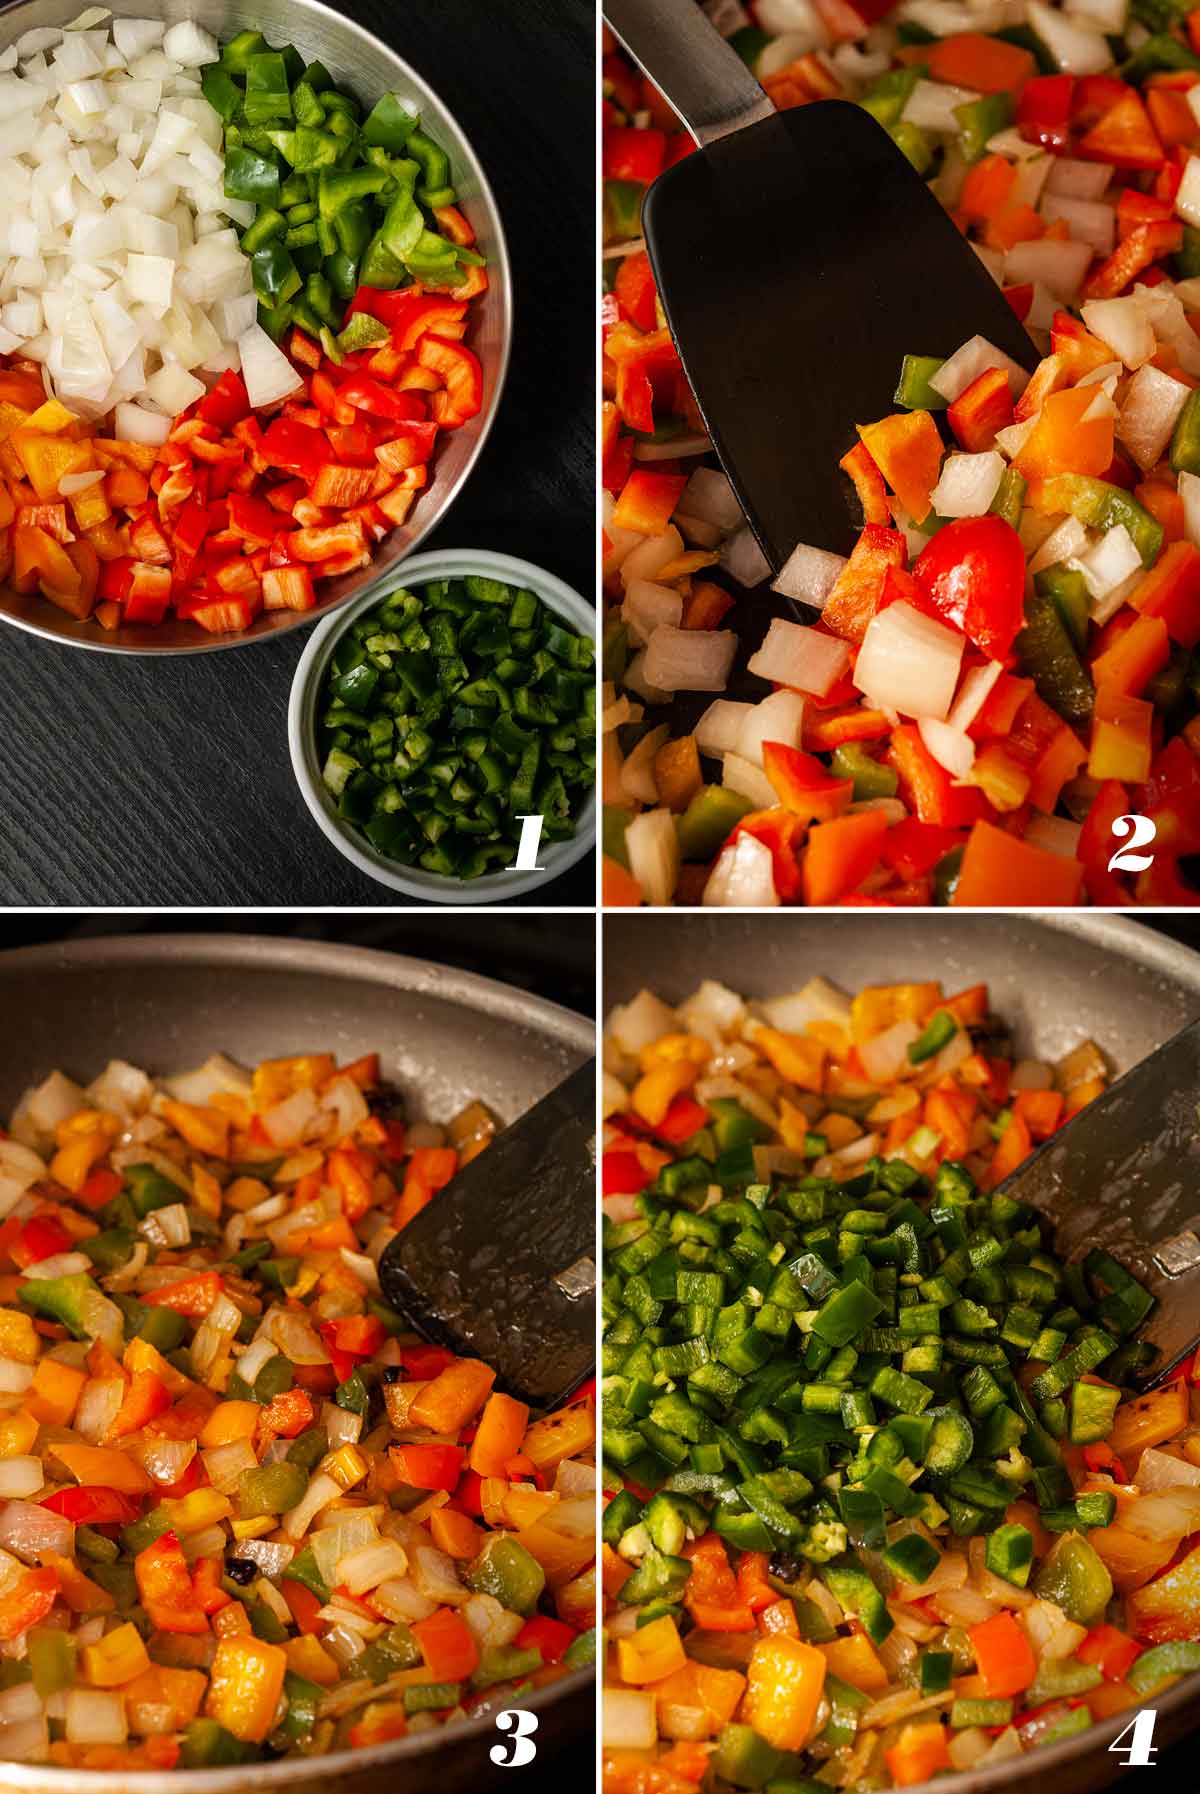 A collage of 4 numbered images showing how to prepare vegetables for chili.